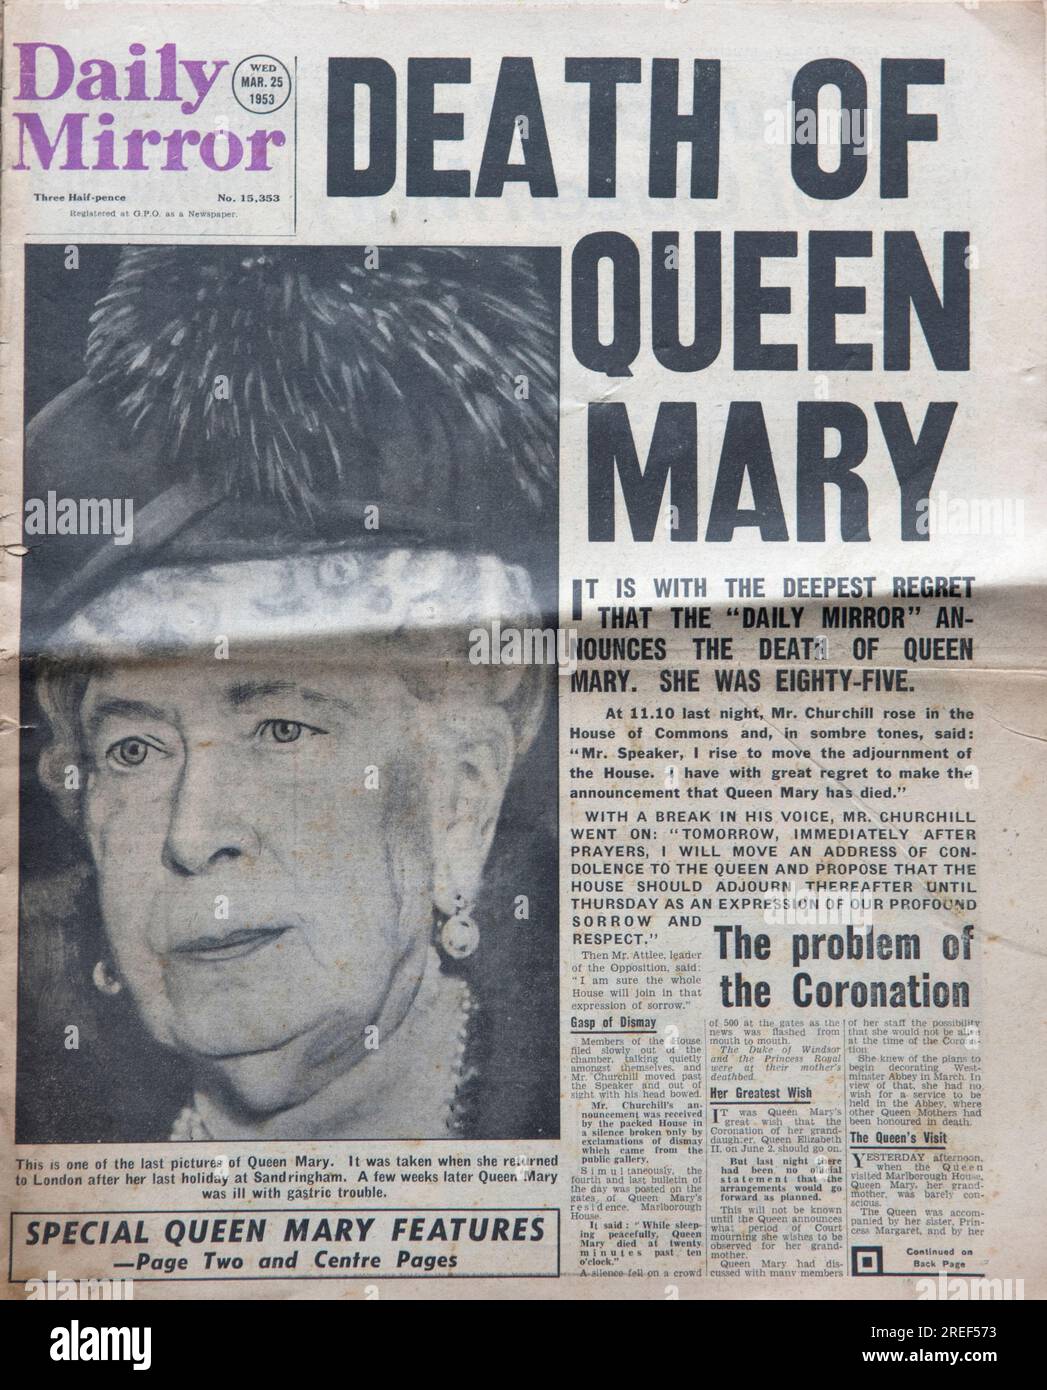 Death of Queen Mary. Front page news of the Daily Mirror newspaper. 25th March 1953. (26 May 1867 – 24 March 1953)  An old worn copy of the newspaper from the 1950s. Mary of Teck wife of George V. Stock Photo